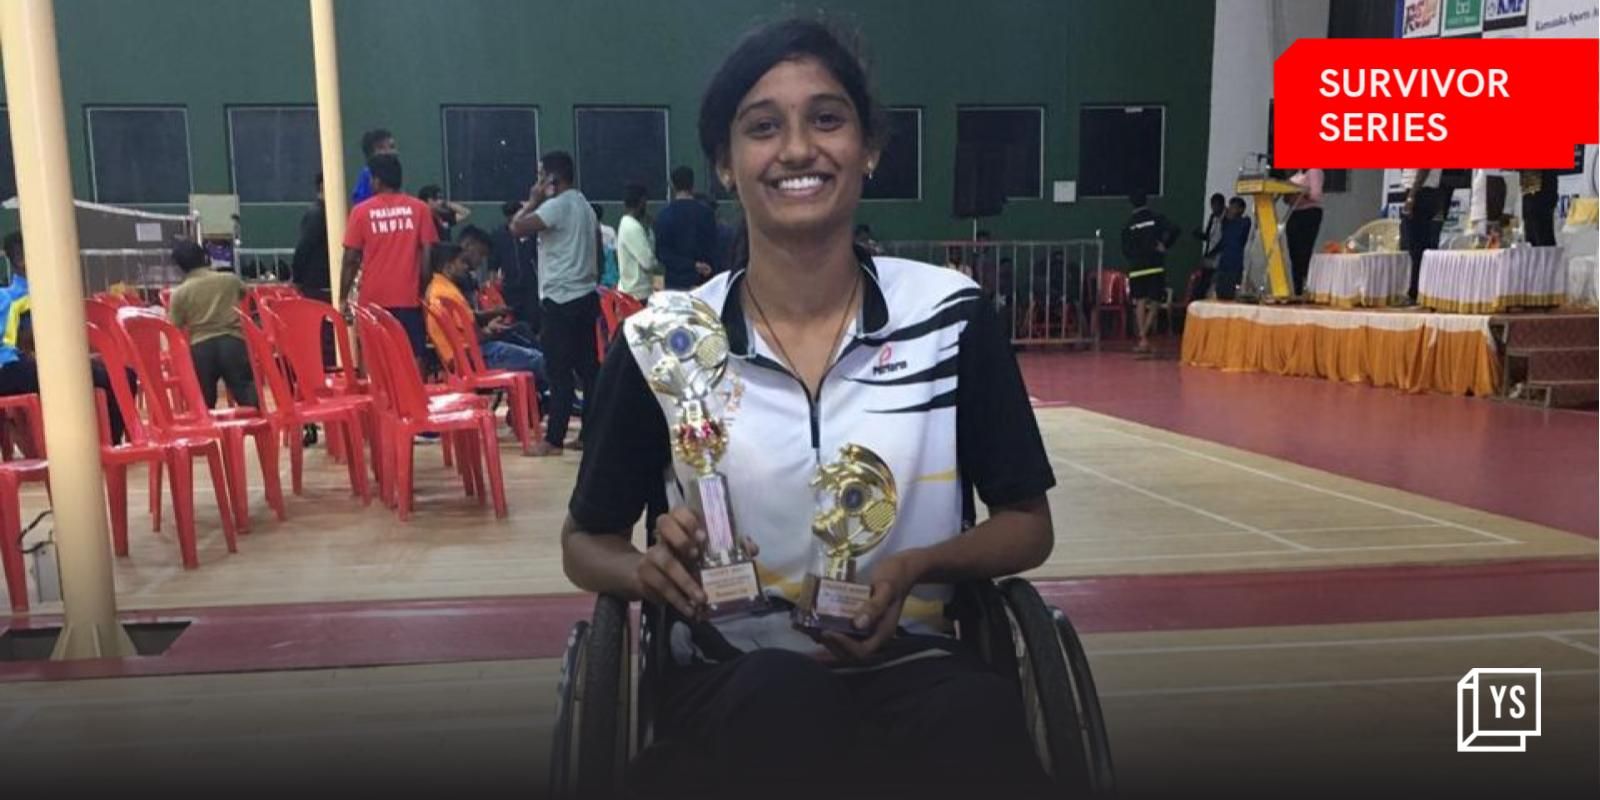 Despite my spinal cord injury, I am a para athlete and want to represent India 